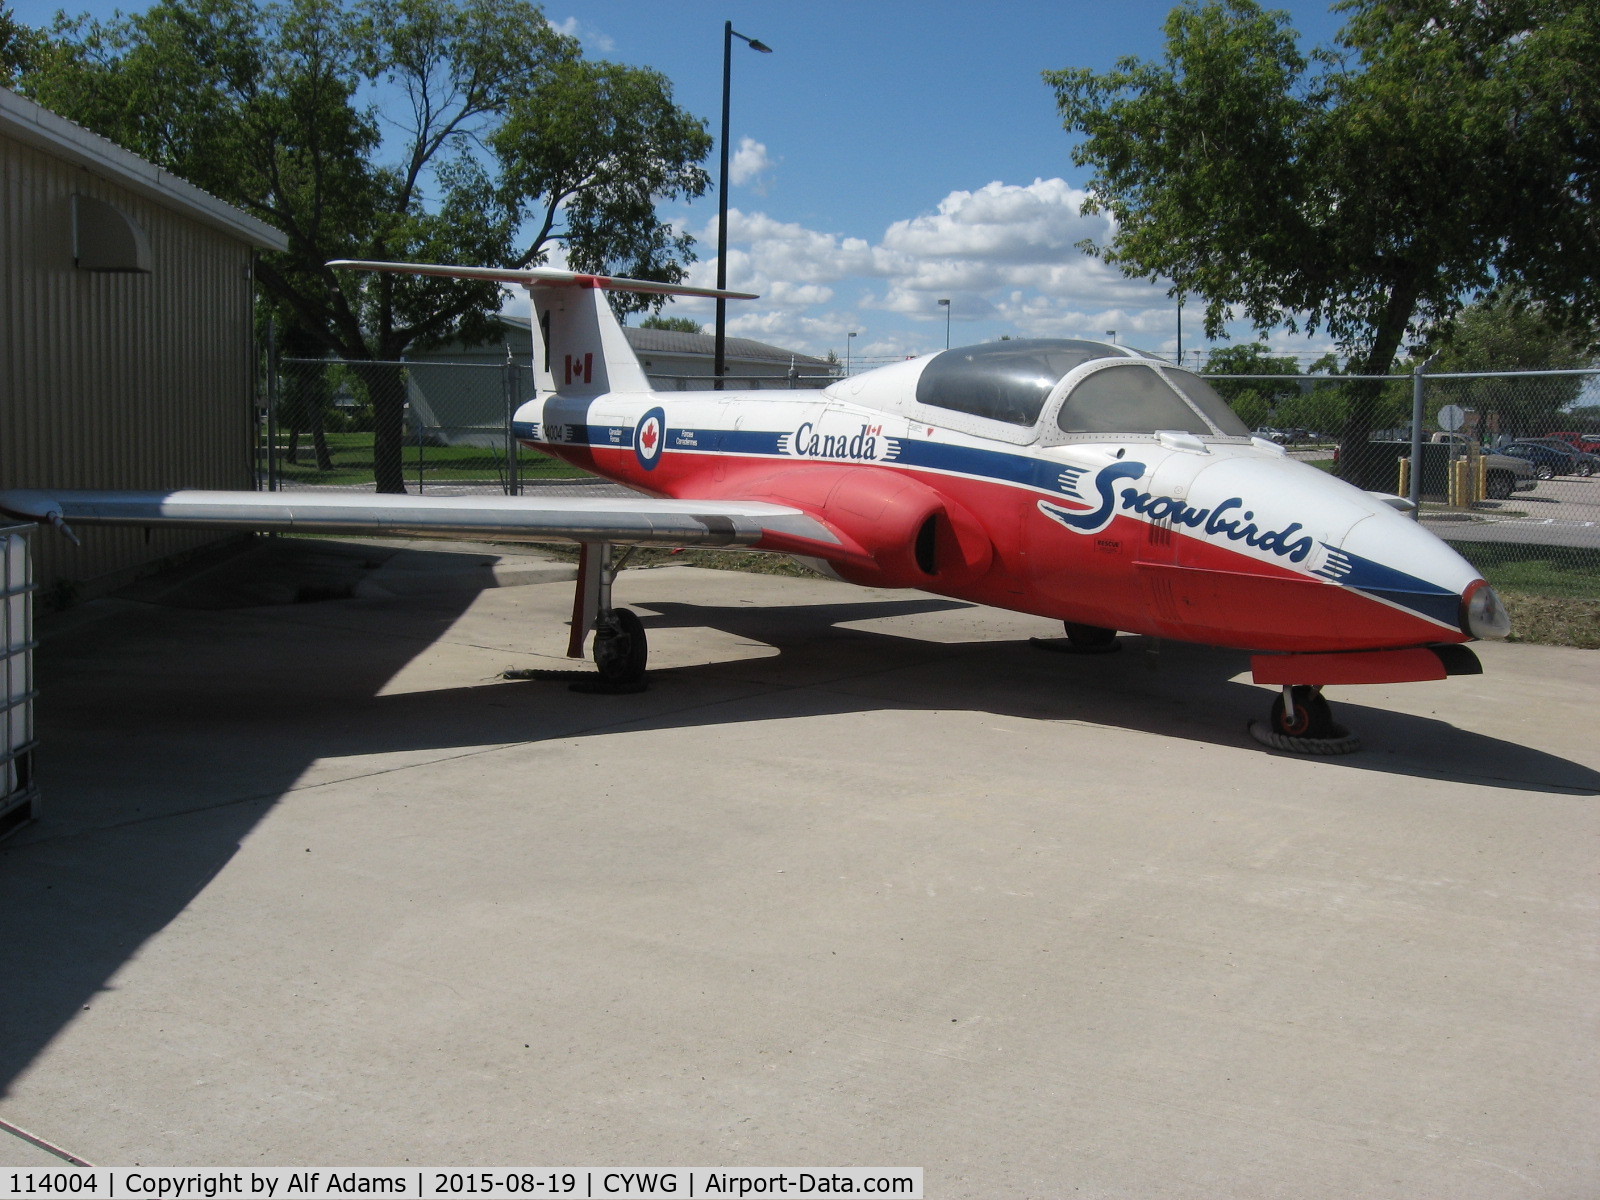 114004, Canadair CT-114 Tutor C/N 1004, Stored outside at Canadian Forces Base Winnipeg, Manitoba.